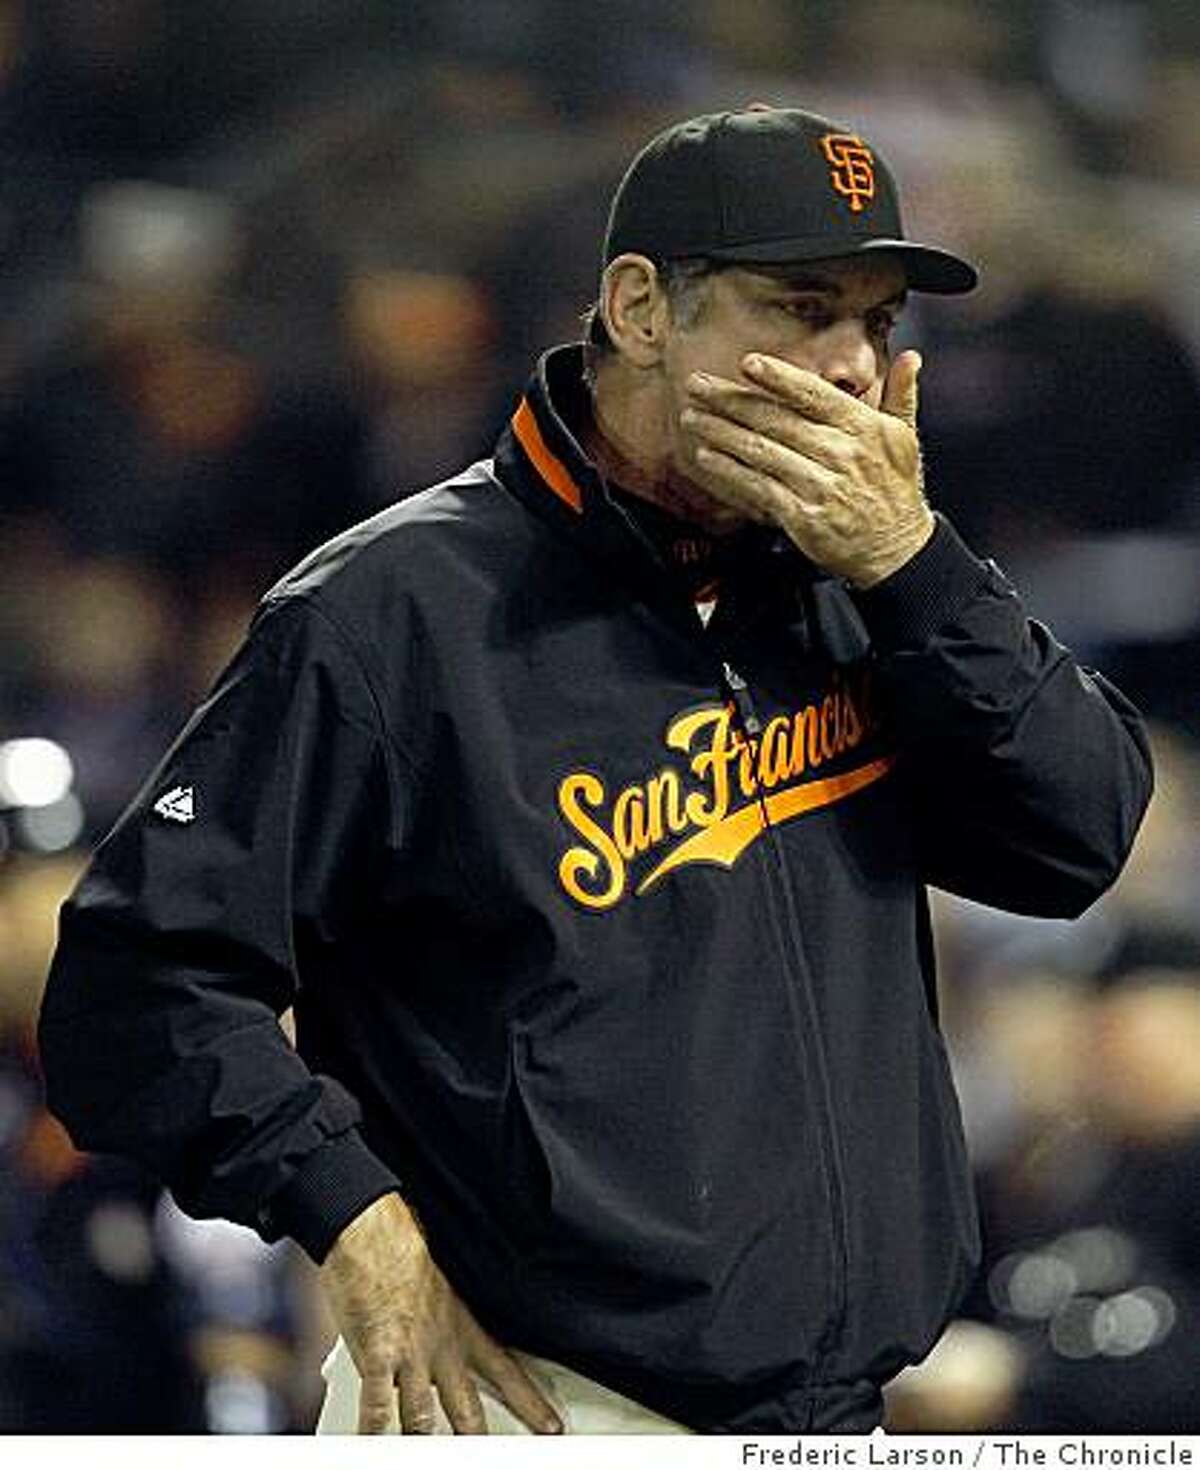 Giants manager Bruce Bochy seem a little concern after his player Edger Renteria left the game with a injury in the 8th inning as the Giants when on to lose to the Mets in the first game of the series at AT&T Park in San Francisco Calif on May 14, 2009.